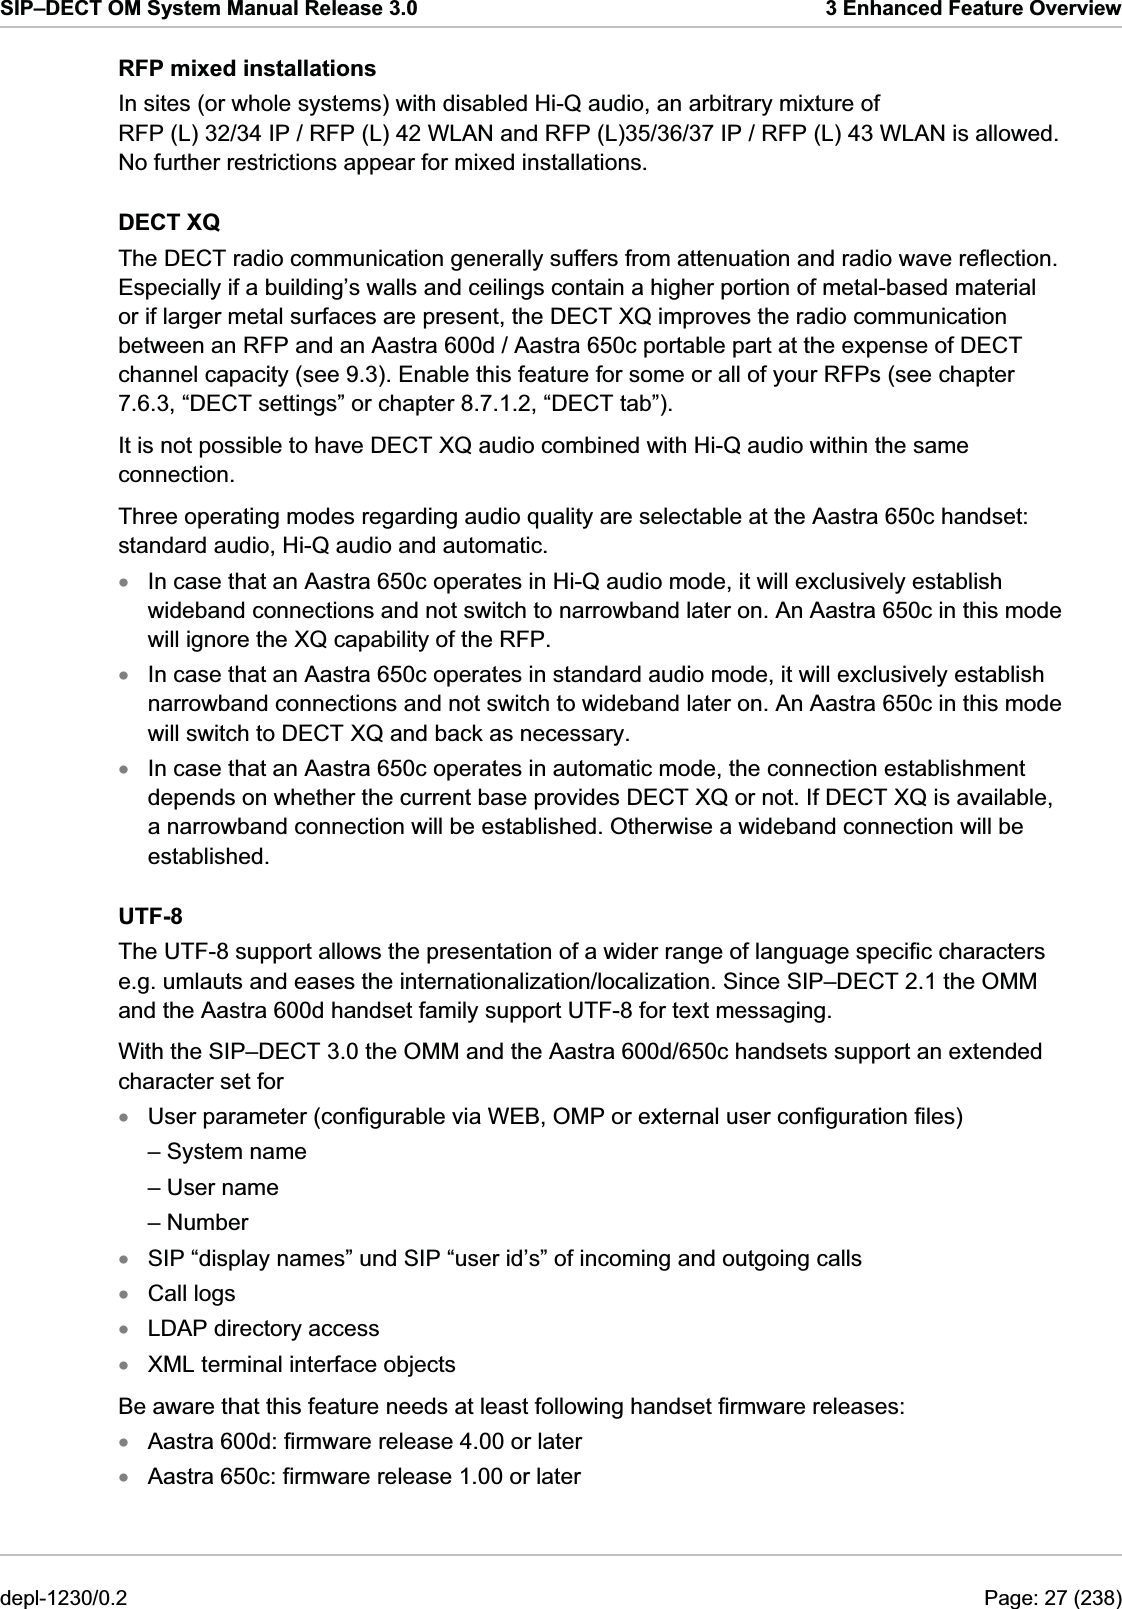 SIP–DECT OM System Manual Release 3.0  3 Enhanced Feature Overview RFP mixed installations In sites (or whole systems) with disabled Hi-Q audio, an arbitrary mixture of RFP (L) 32/34 IP / RFP (L) 42 WLAN and RFP (L)35/36/37 IP / RFP (L) 43 WLAN is allowed. No further restrictions appear for mixed installations. DECT XQ The DECT radio communication generally suffers from attenuation and radio wave reflection. Especially if a building’s walls and ceilings contain a higher portion of metal-based material or if larger metal surfaces are present, the DECT XQ improves the radio communication between an RFP and an Aastra 600d / Aastra 650c portable part at the expense of DECT channel capacity (see 9.3). Enable this feature for some or all of your RFPs (see chapter 7.6.3, “DECT settings” or chapter 8.7.1.2, “DECT tab”). It is not possible to have DECT XQ audio combined with Hi-Q audio within the same connection. Three operating modes regarding audio quality are selectable at the Aastra 650c handset: standard audio, Hi-Q audio and automatic. In case that an Aastra 650c operates in Hi-Q audio mode, it will exclusively establish wideband connections and not switch to narrowband later on. An Aastra 650c in this mode will ignore the XQ capability of the RFP. xxxxxxxxxxIn case that an Aastra 650c operates in standard audio mode, it will exclusively establish narrowband connections and not switch to wideband later on. An Aastra 650c in this mode will switch to DECT XQ and back as necessary. In case that an Aastra 650c operates in automatic mode, the connection establishment depends on whether the current base provides DECT XQ or not. If DECT XQ is available, a narrowband connection will be established. Otherwise a wideband connection will be established. UTF-8 The UTF-8 support allows the presentation of a wider range of language specific characters e.g. umlauts and eases the internationalization/localization. Since SIP–DECT 2.1 the OMM and the Aastra 600d handset family support UTF-8 for text messaging. With the SIP–DECT 3.0 the OMM and the Aastra 600d/650c handsets support an extended character set for  User parameter (configurable via WEB, OMP or external user configuration files) – System name – User name – Number SIP “display names” und SIP “user id’s” of incoming and outgoing calls Call logs LDAP directory access XML terminal interface objects Be aware that this feature needs at least following handset firmware releases: Aastra 600d: firmware release 4.00 or later Aastra 650c: firmware release 1.00 or later depl-1230/0.2  Page: 27 (238) 